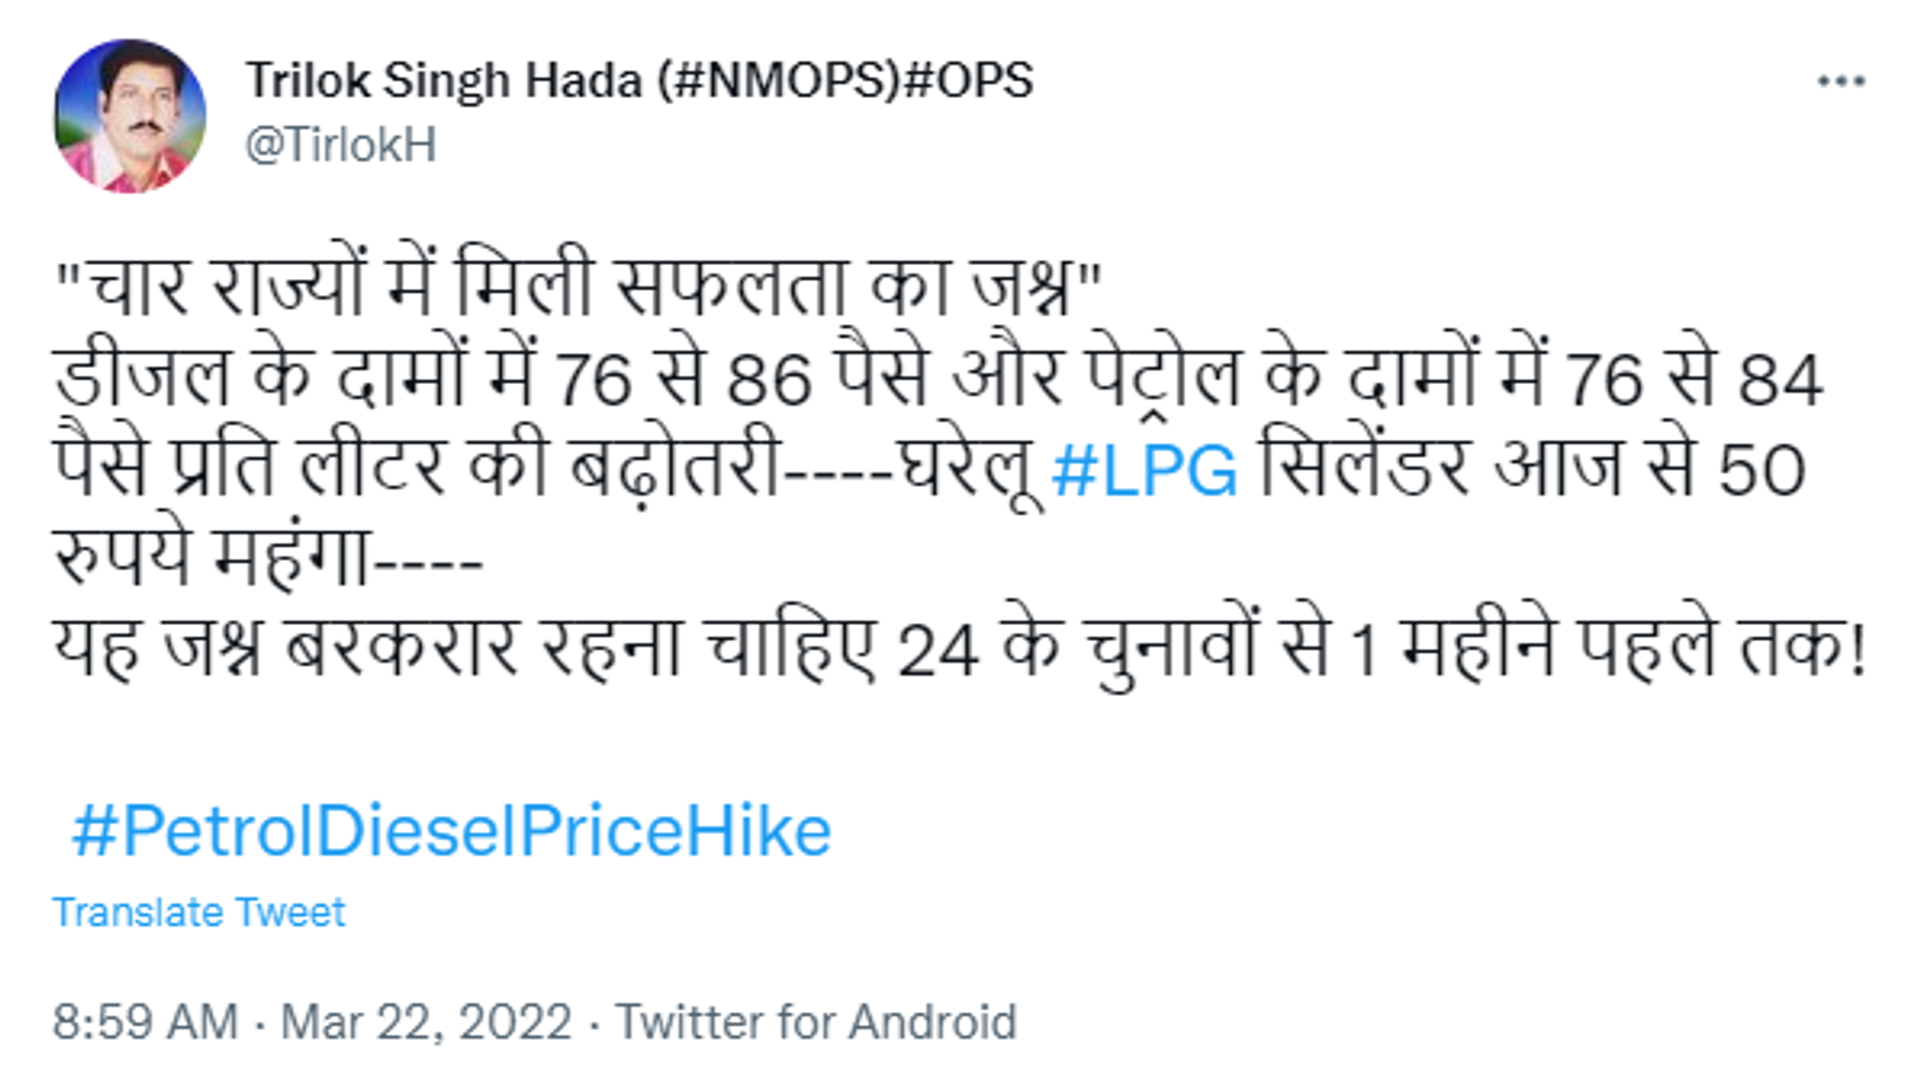 A Twitter User Takes Jibe at Modi Government for Increase in Fuel Prices - Sputnik International, 1920, 22.03.2022